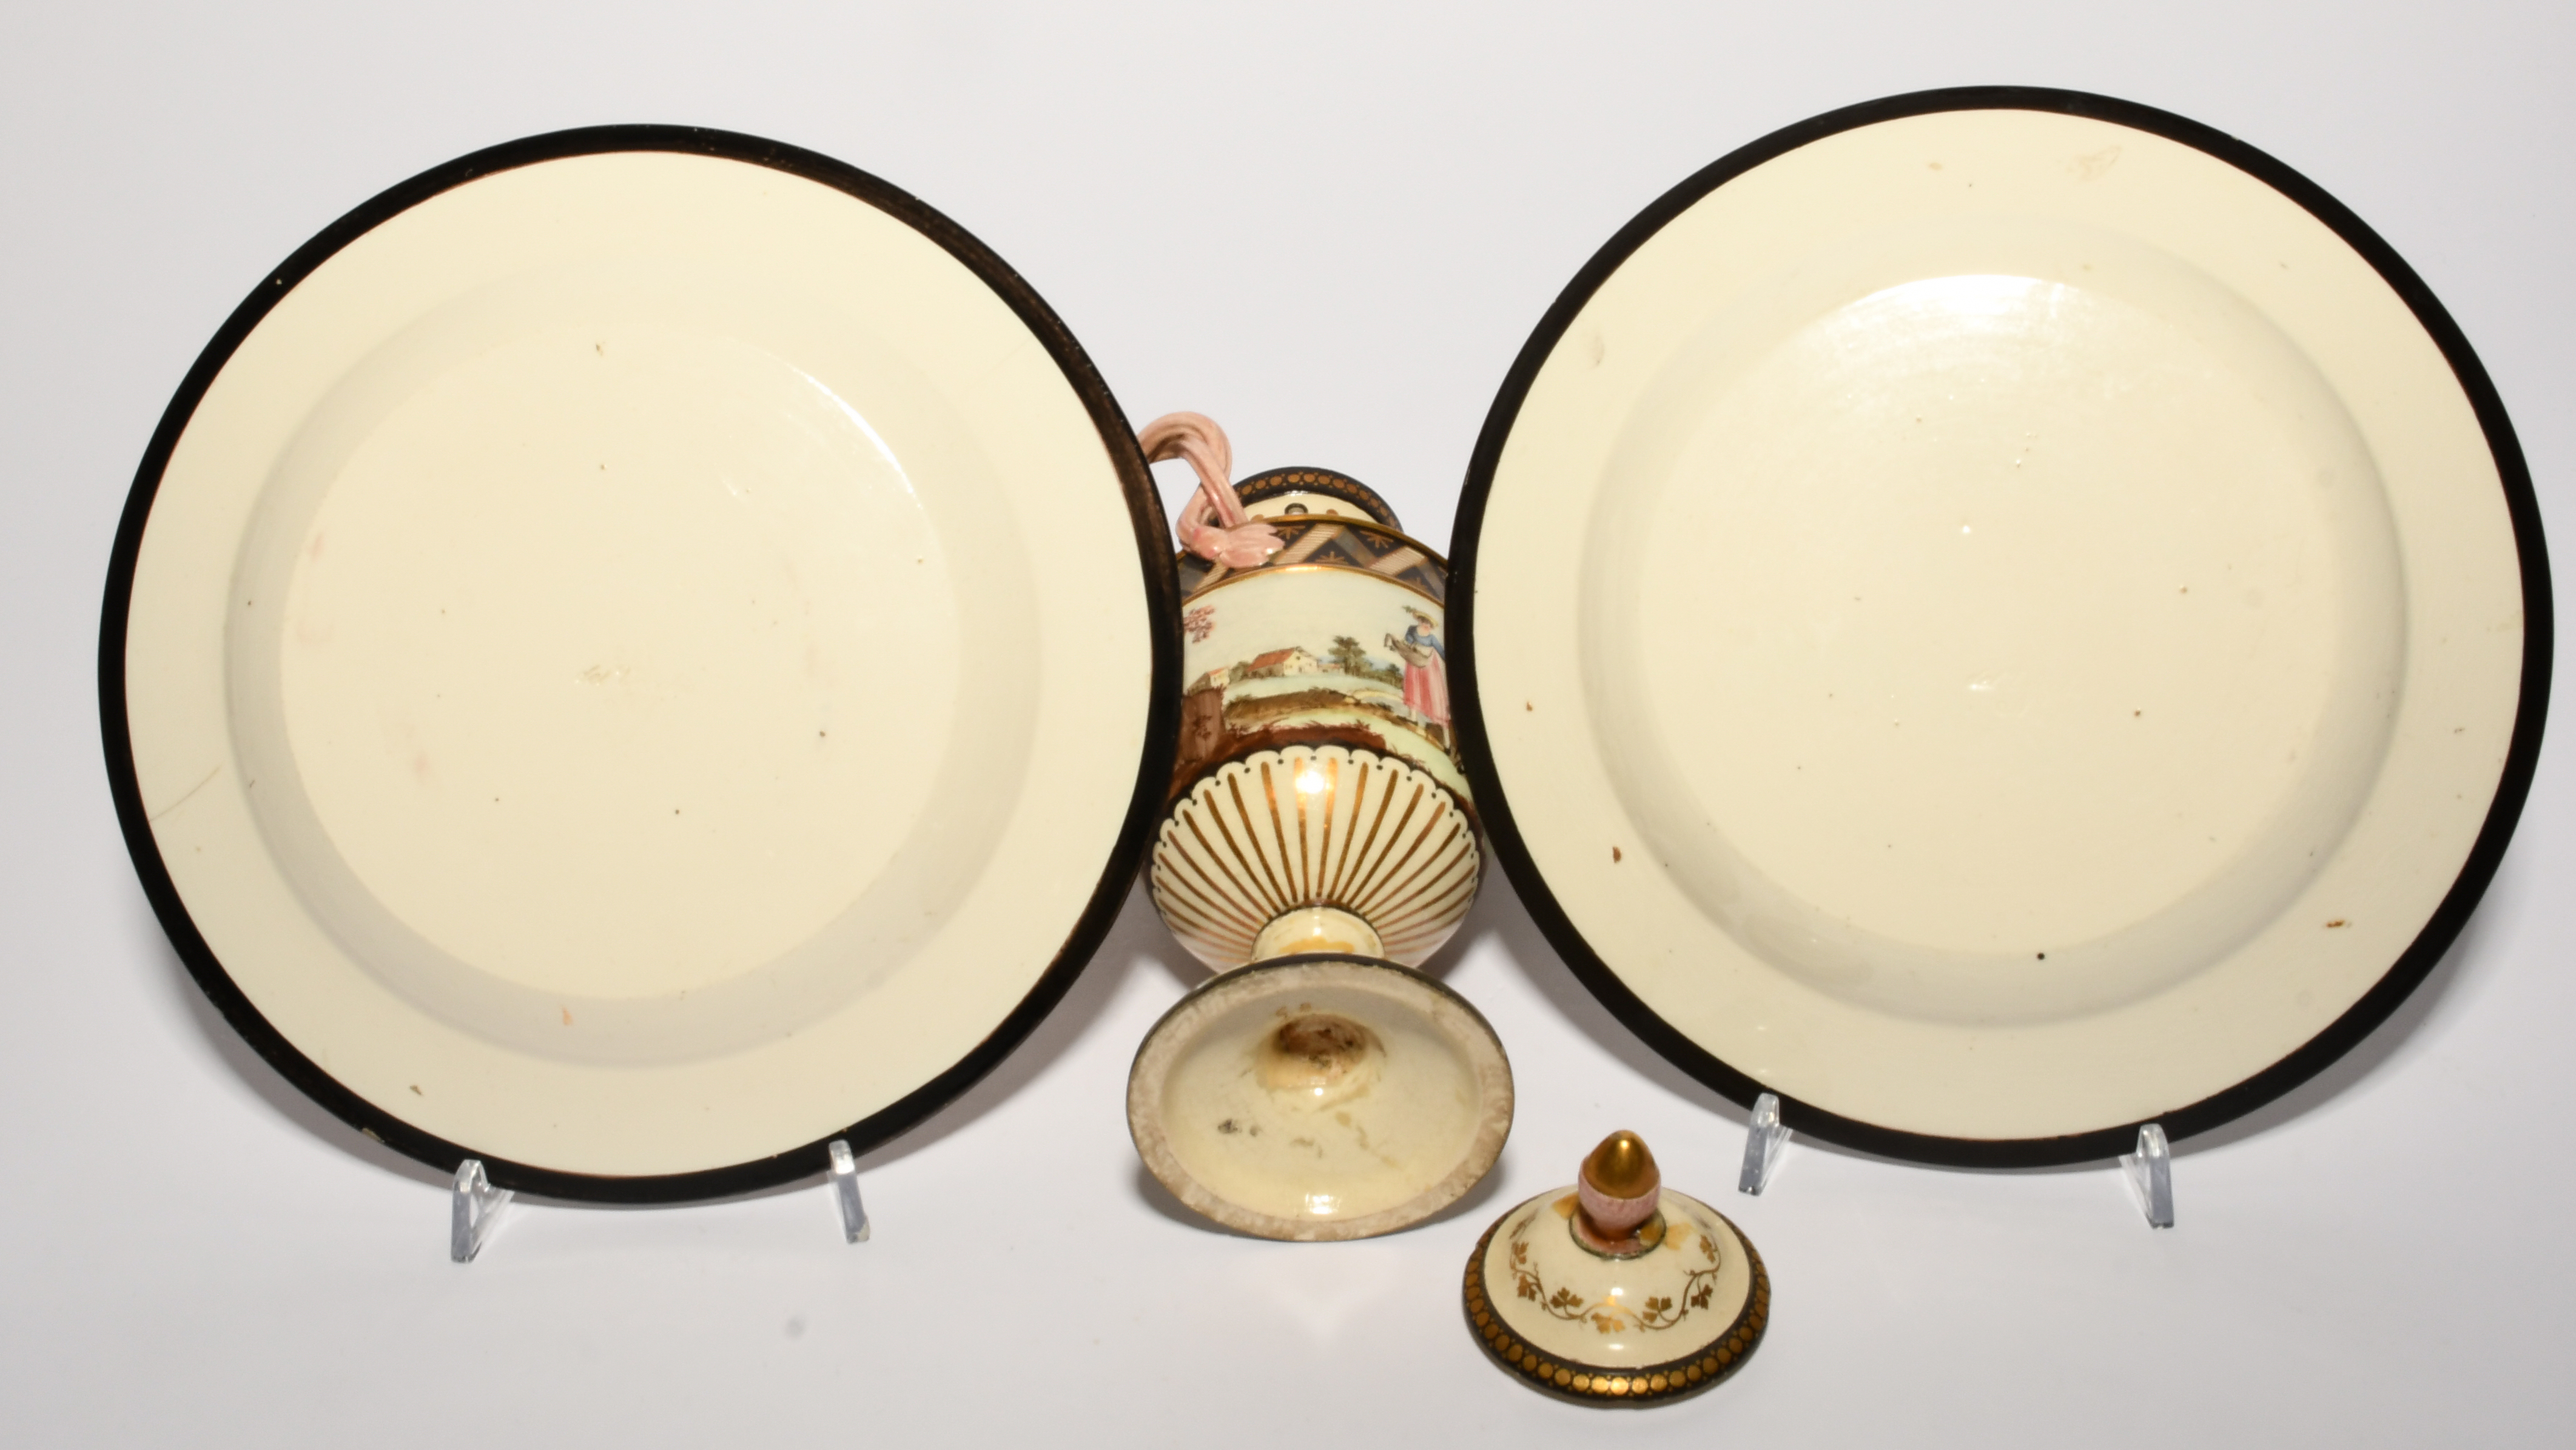 Two Naples (Guistiniani) creamware plates, 19th century, decorated in the Egyptian Revival manner - Image 2 of 2